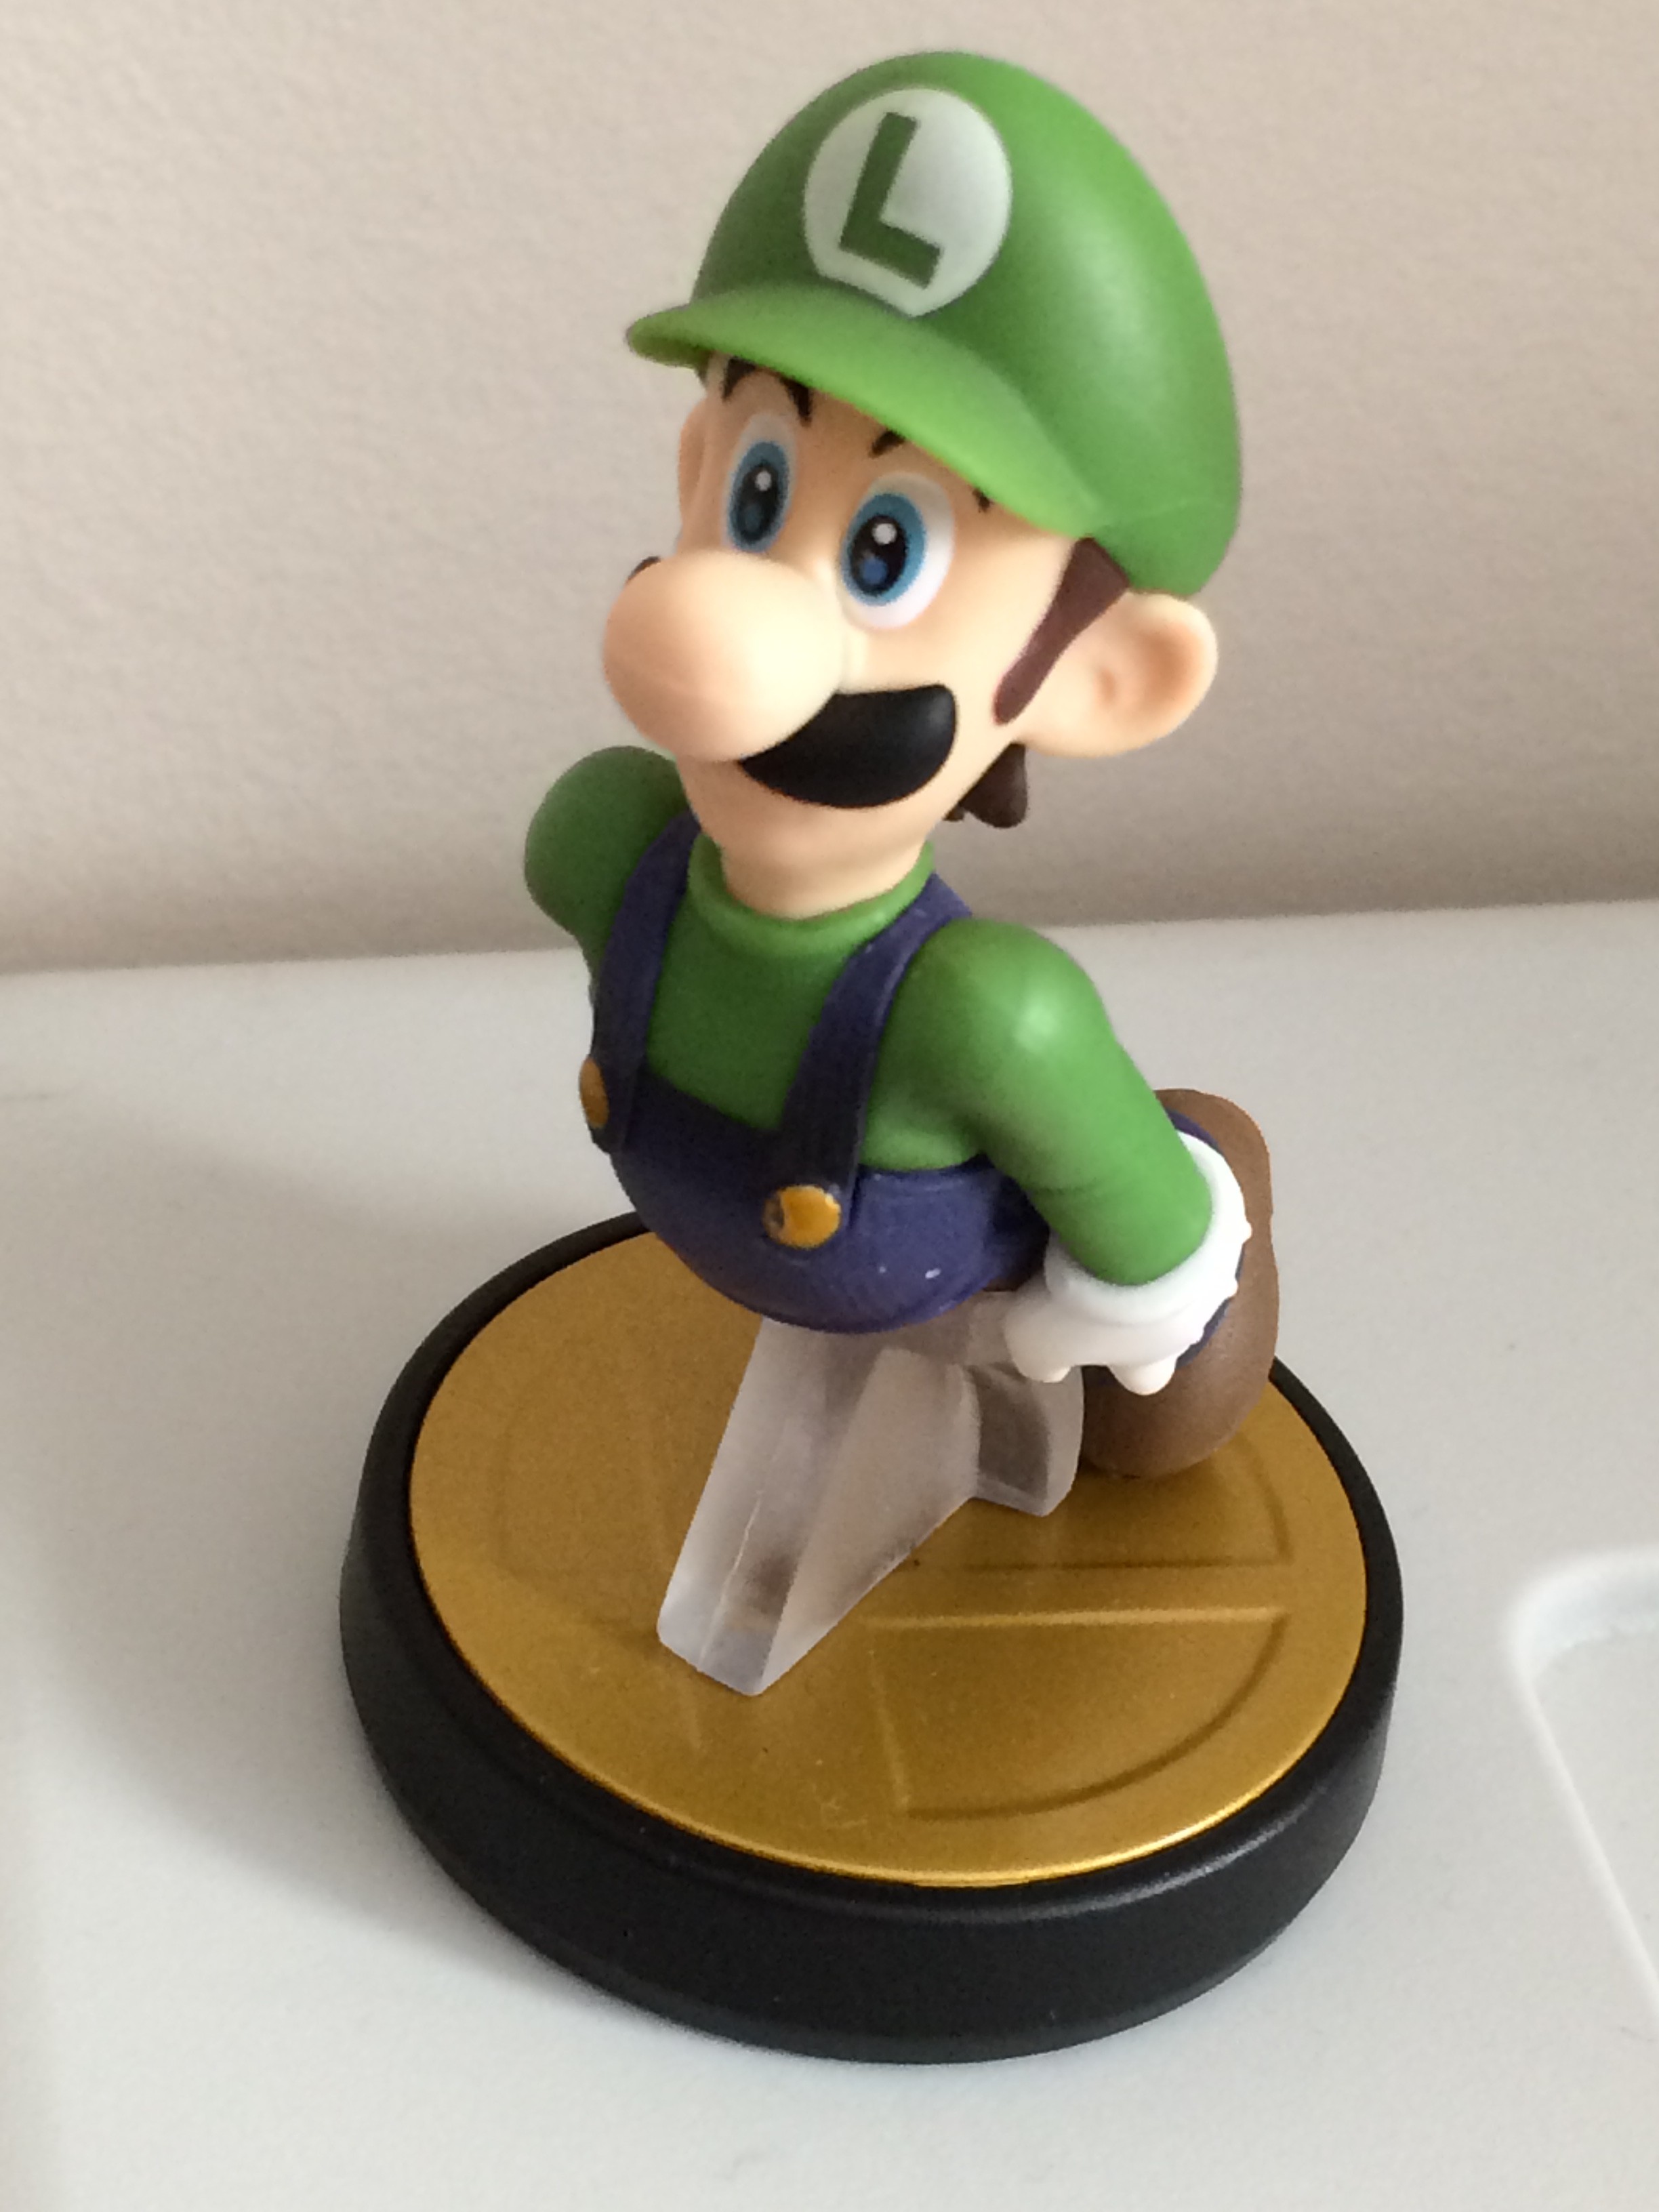 Confessions of a newly converted Amiibo owner